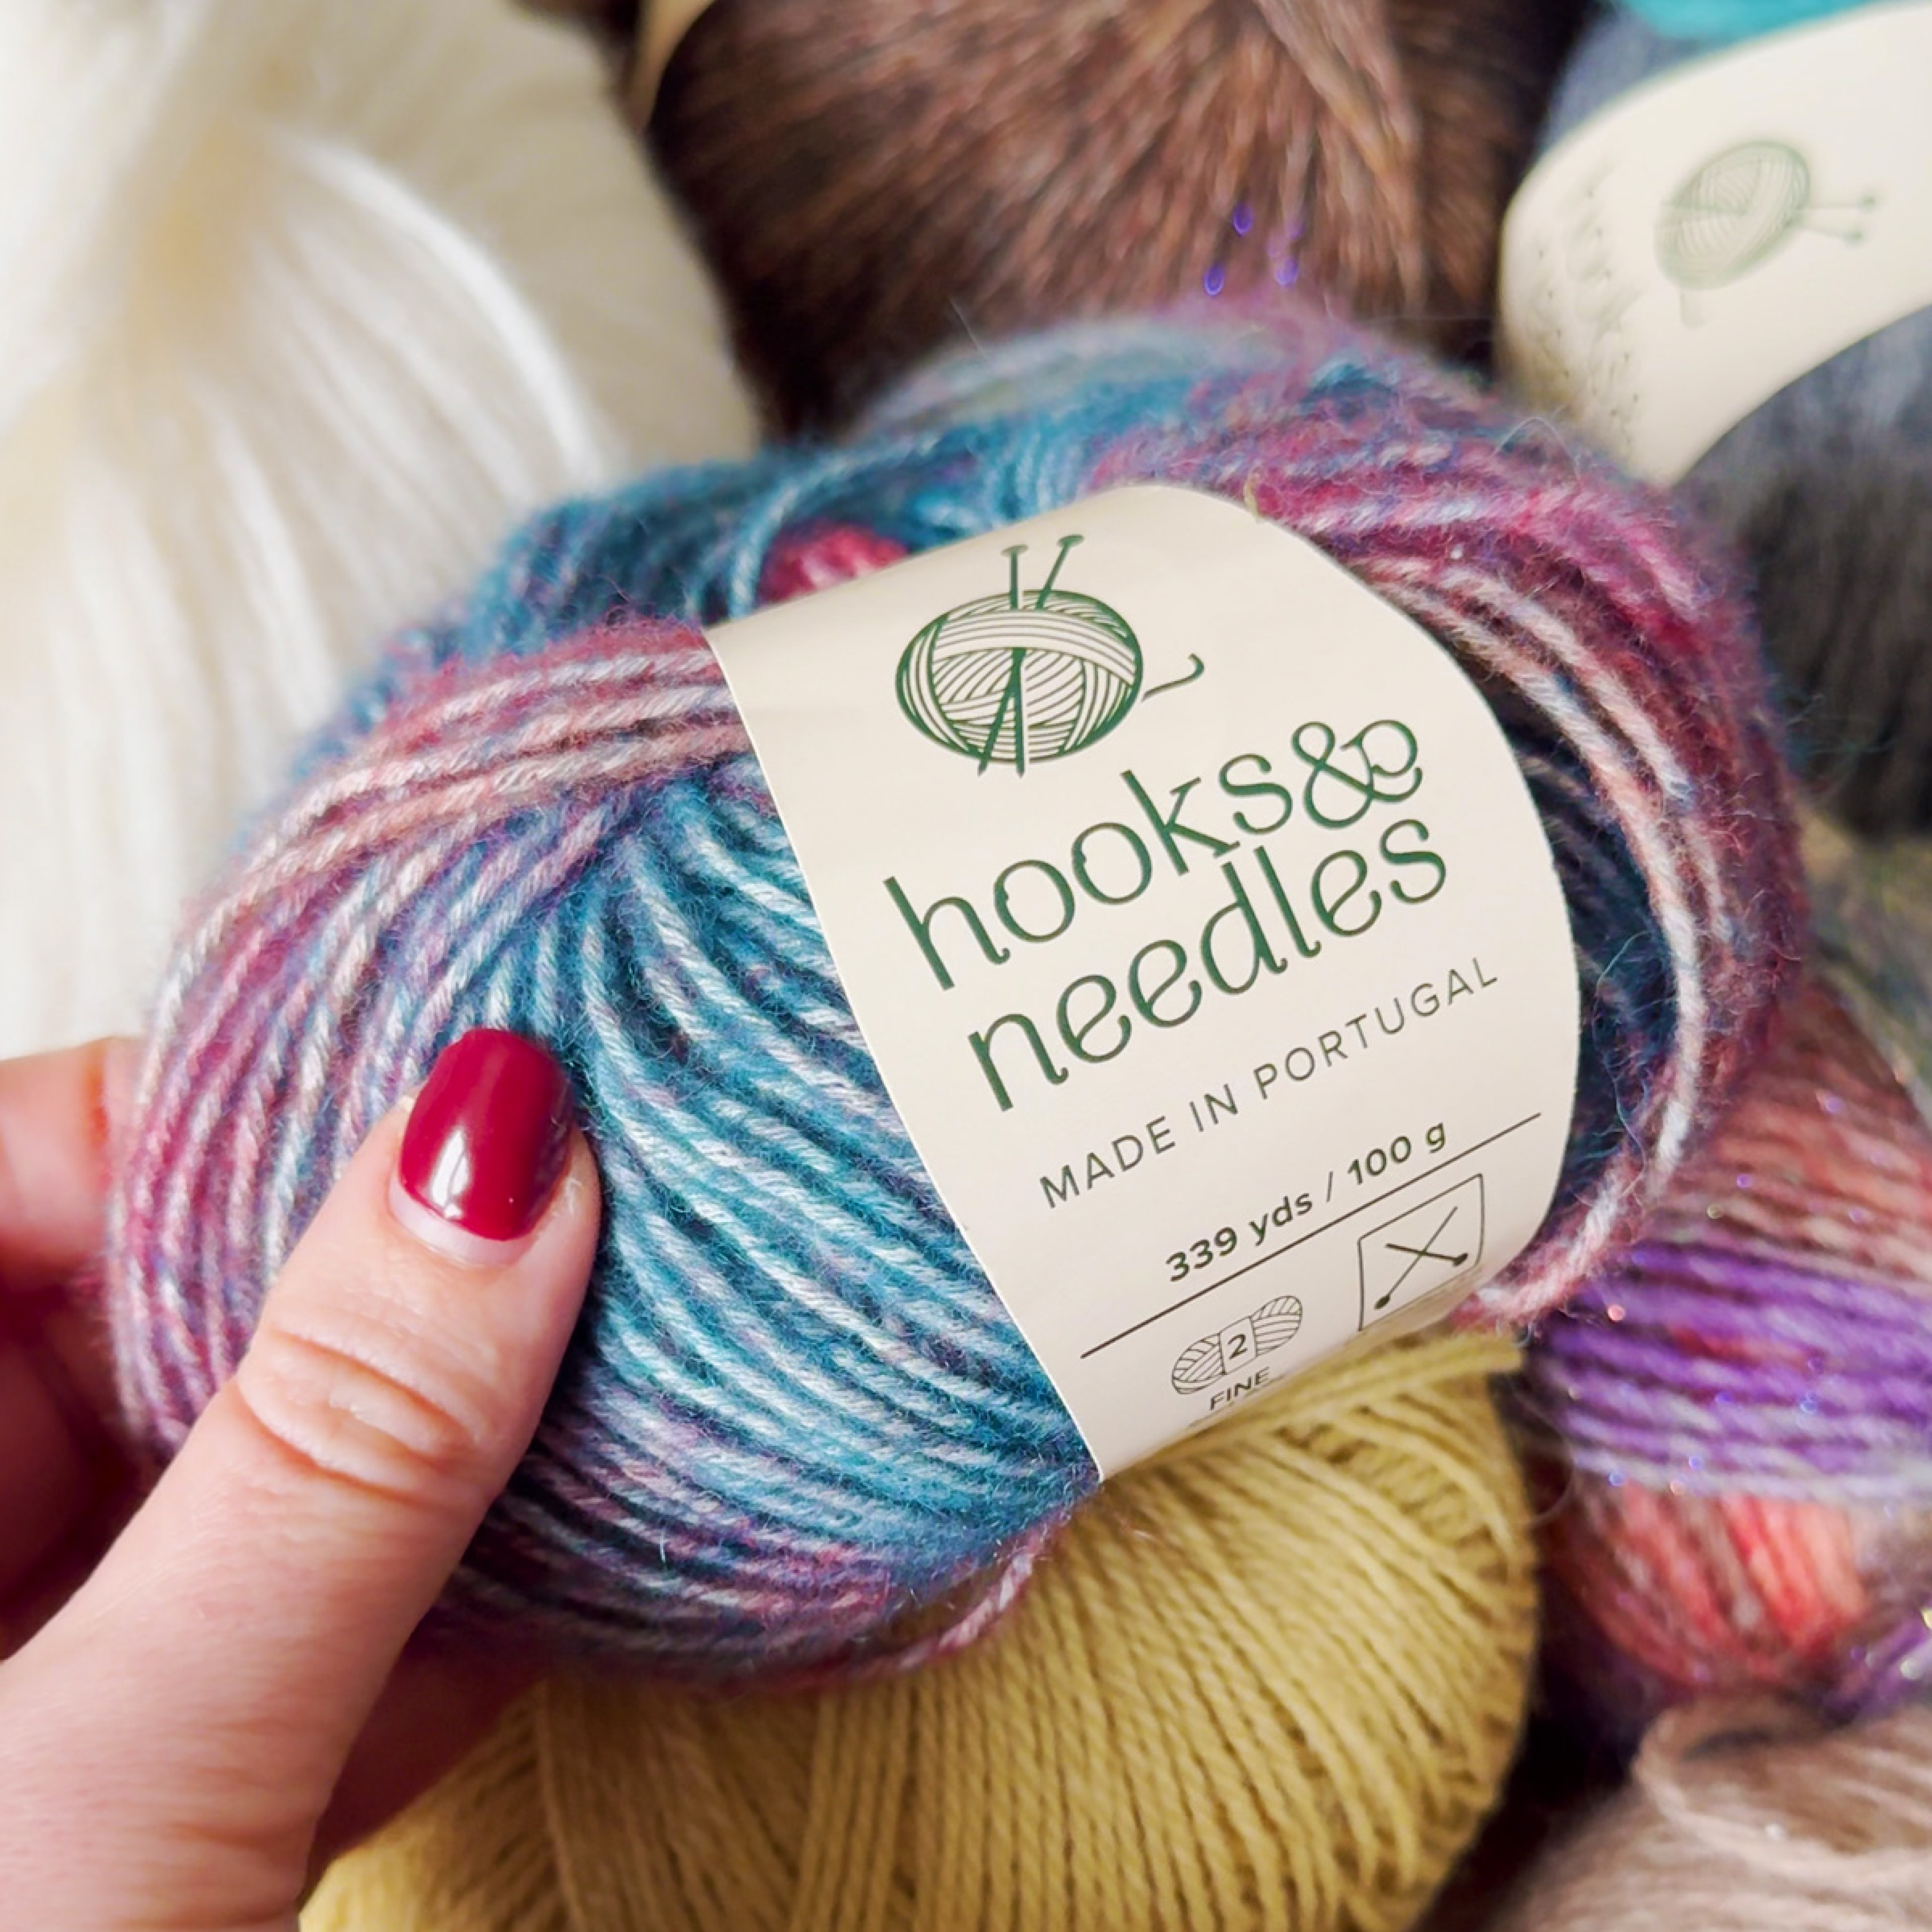 A hand holding a multicolored skein of yarn with a label reading "[3-Month-Prepaid] Hooks & Needles Subscription Box #11 made in portugal." other yarns in soft colors are visible in the background.